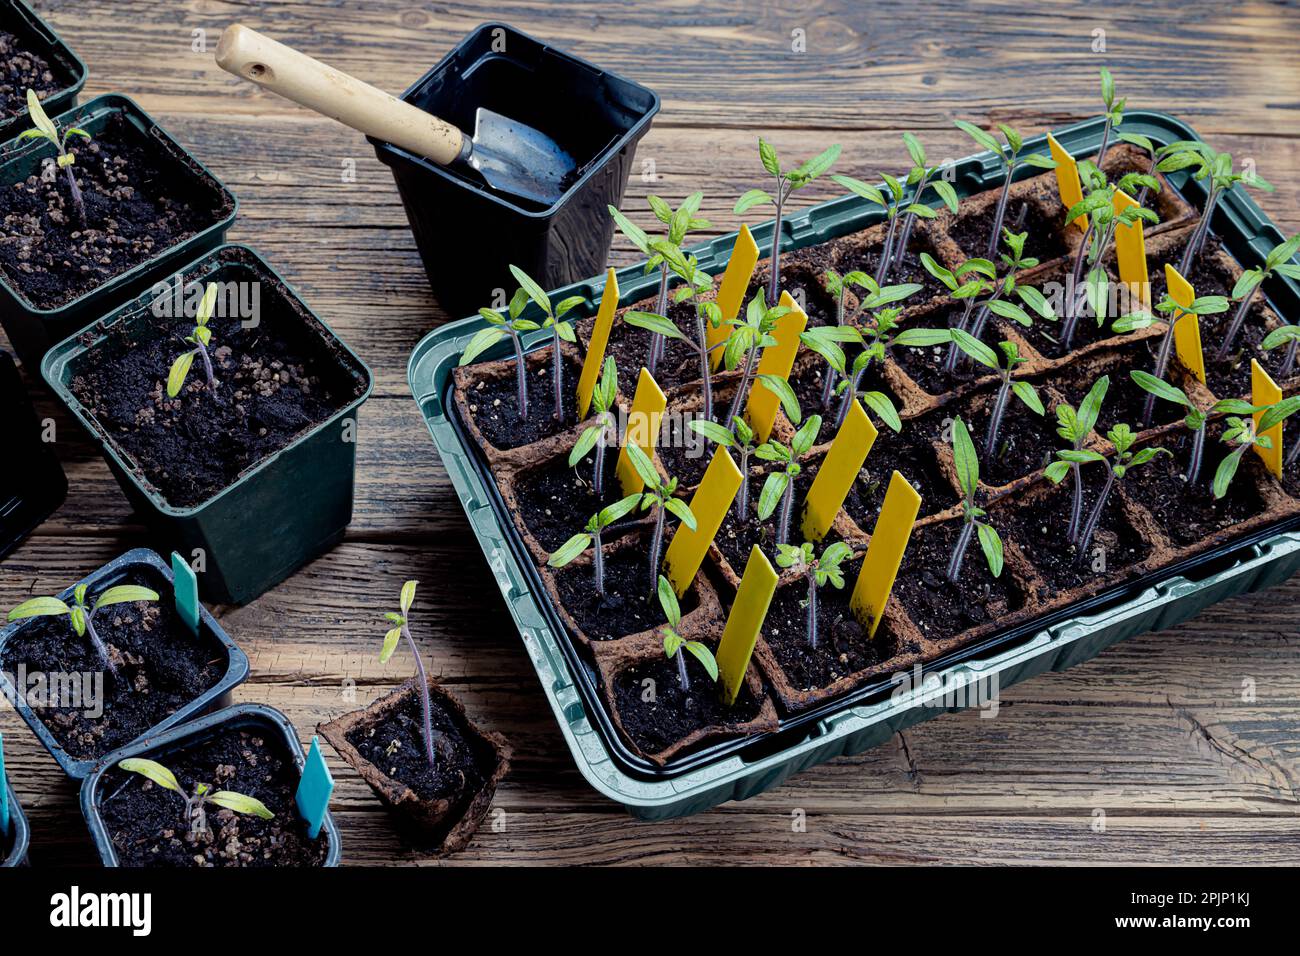 Transplanting tomato sprouts in biodegradable peat pots into reusable pots and gardening tools on the wooden surface, home gardening and connecting wi Stock Photo